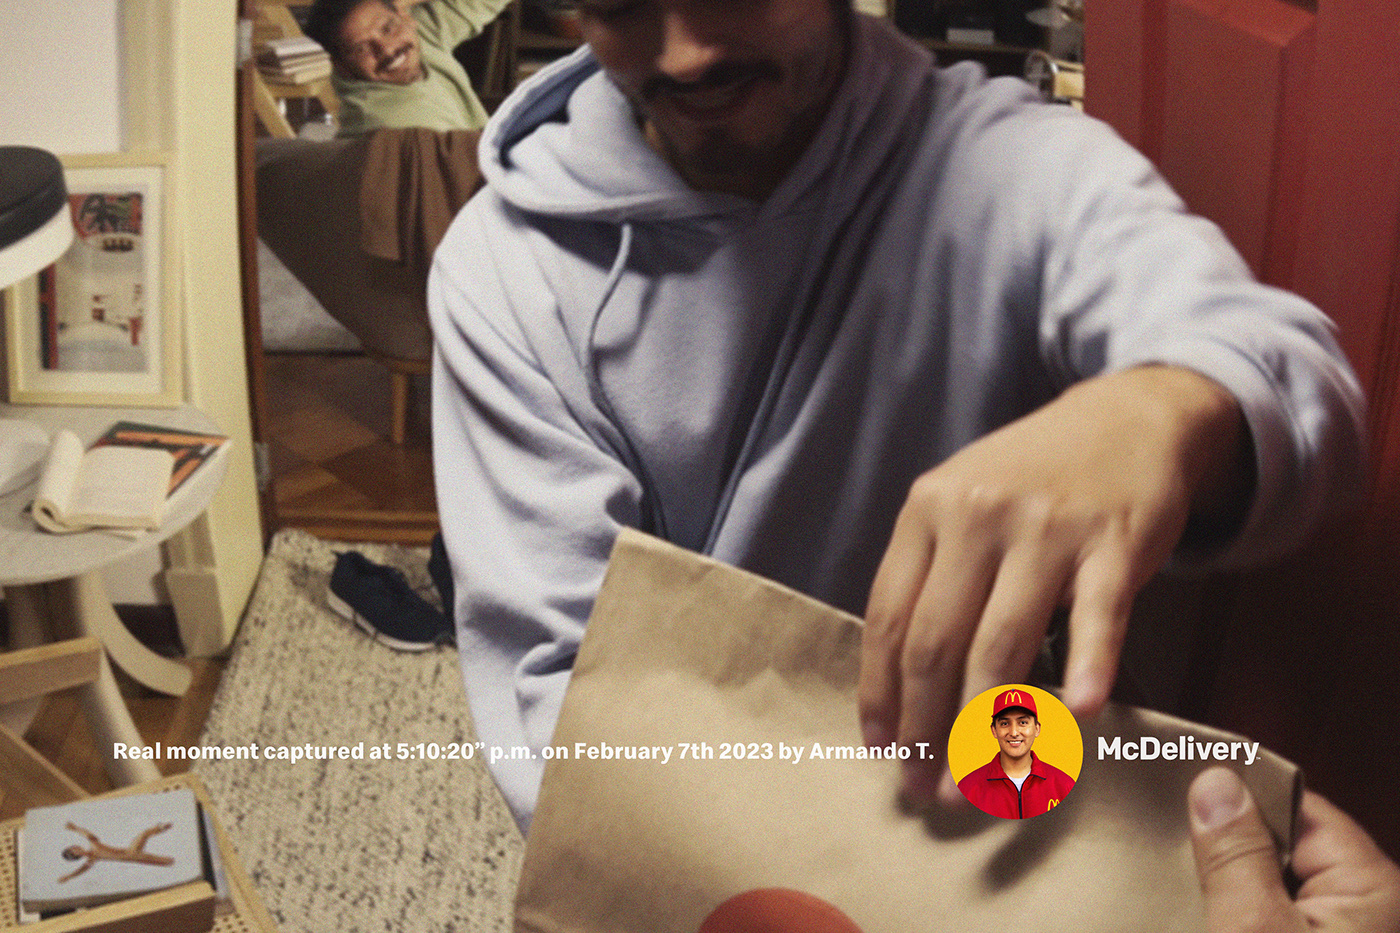 ads campaign McDelivery mcdonald's print